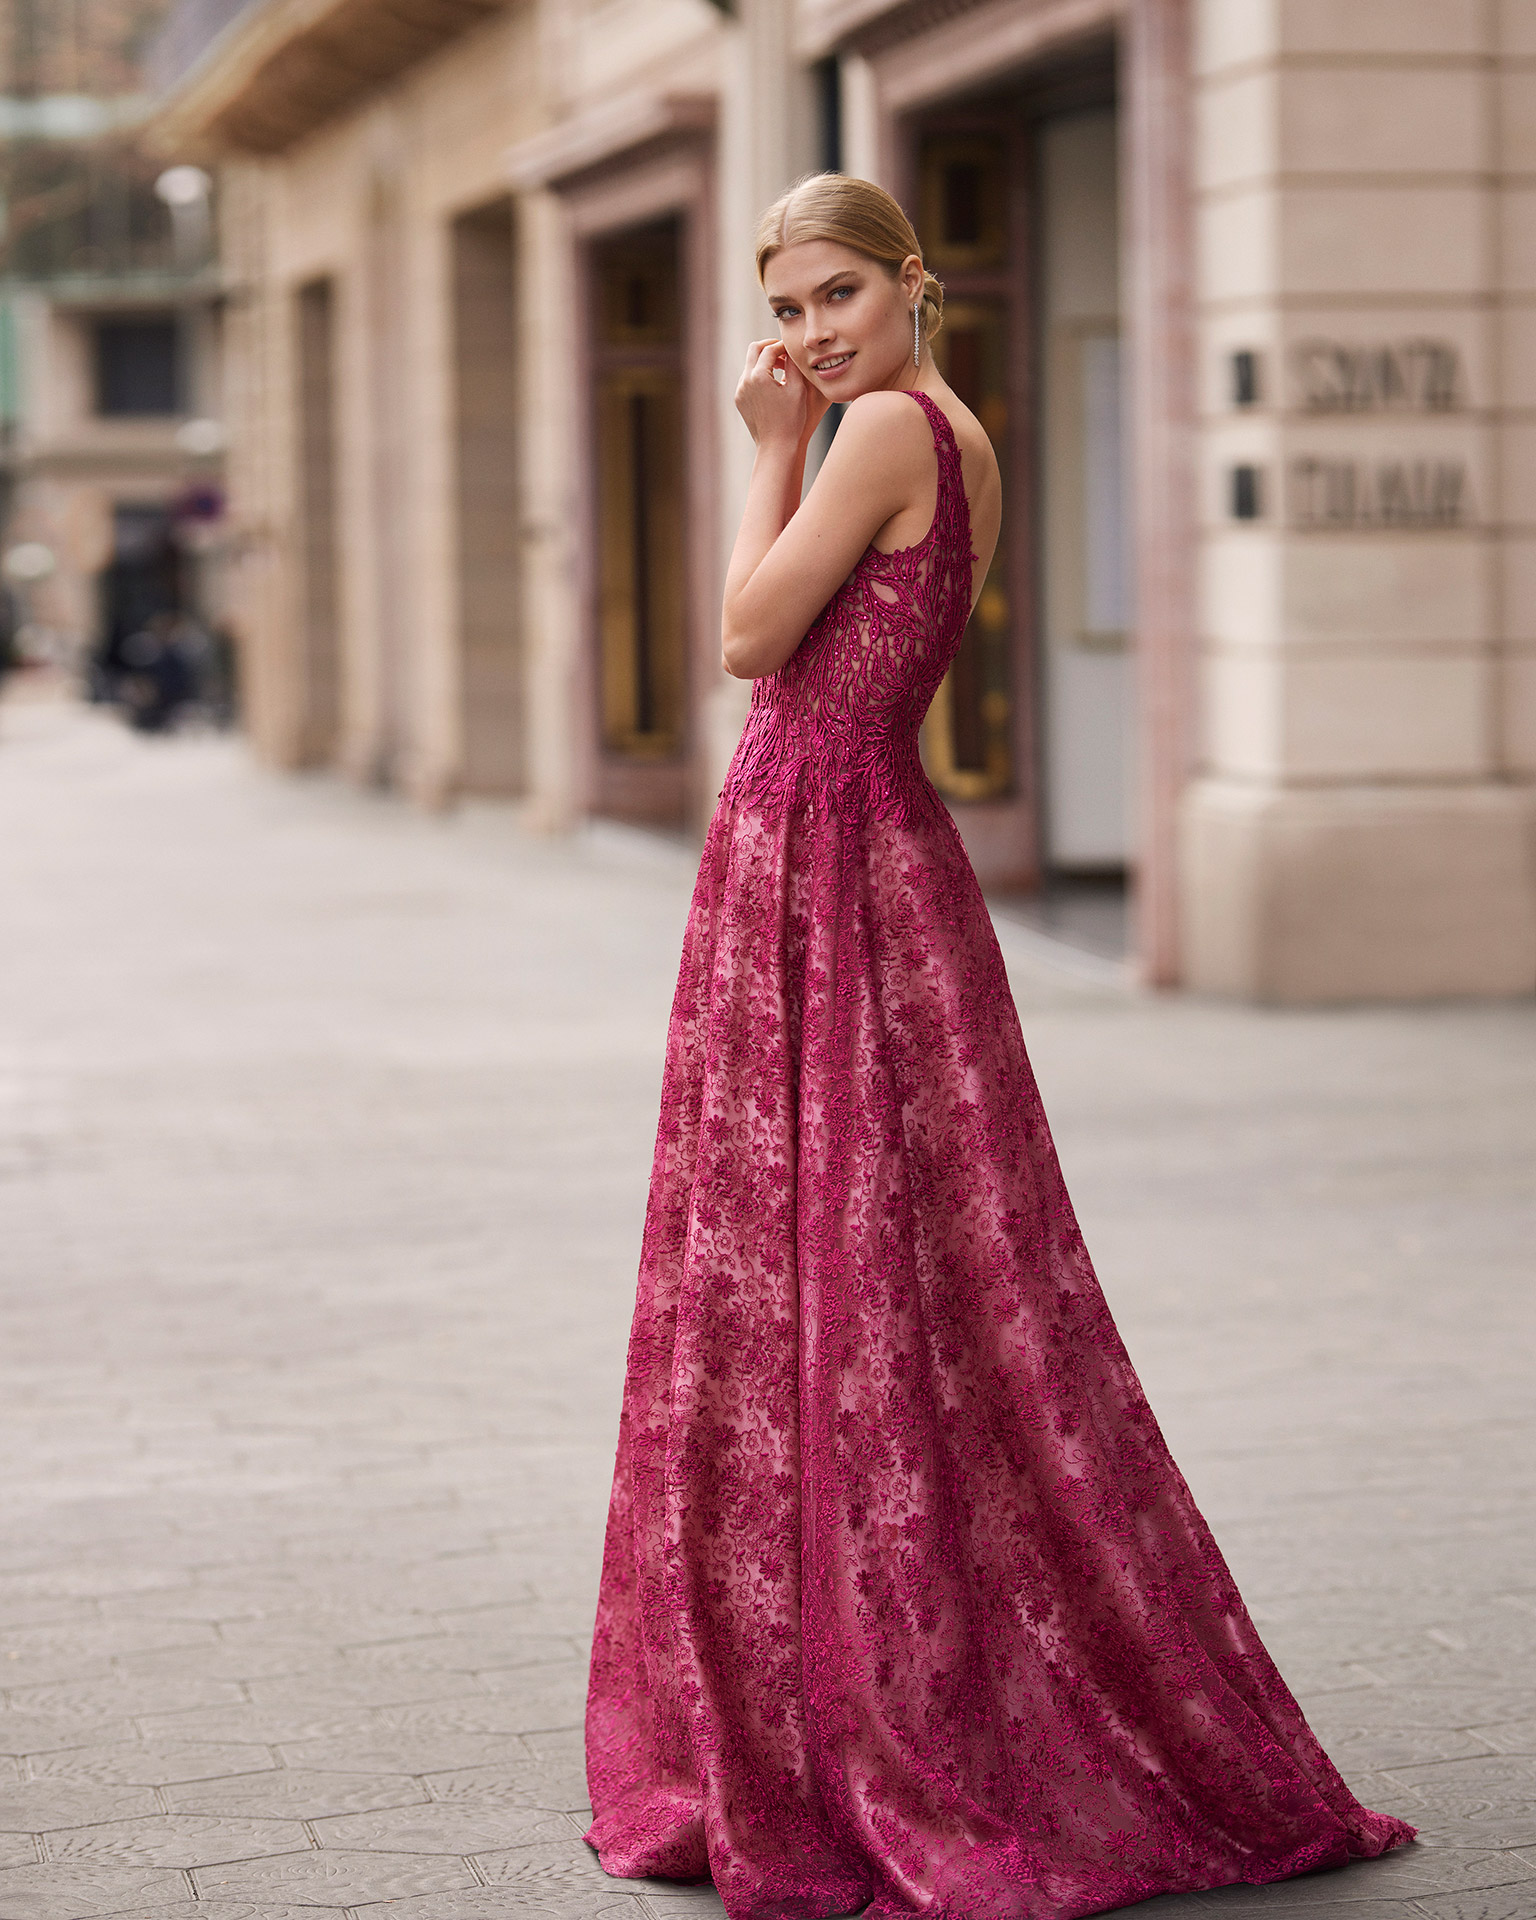 Long princess-style evening dress, made of lace with beadwork. Marfil Barcelona design with a V-neckline, and an open back. MARFIL_BARCELONA.